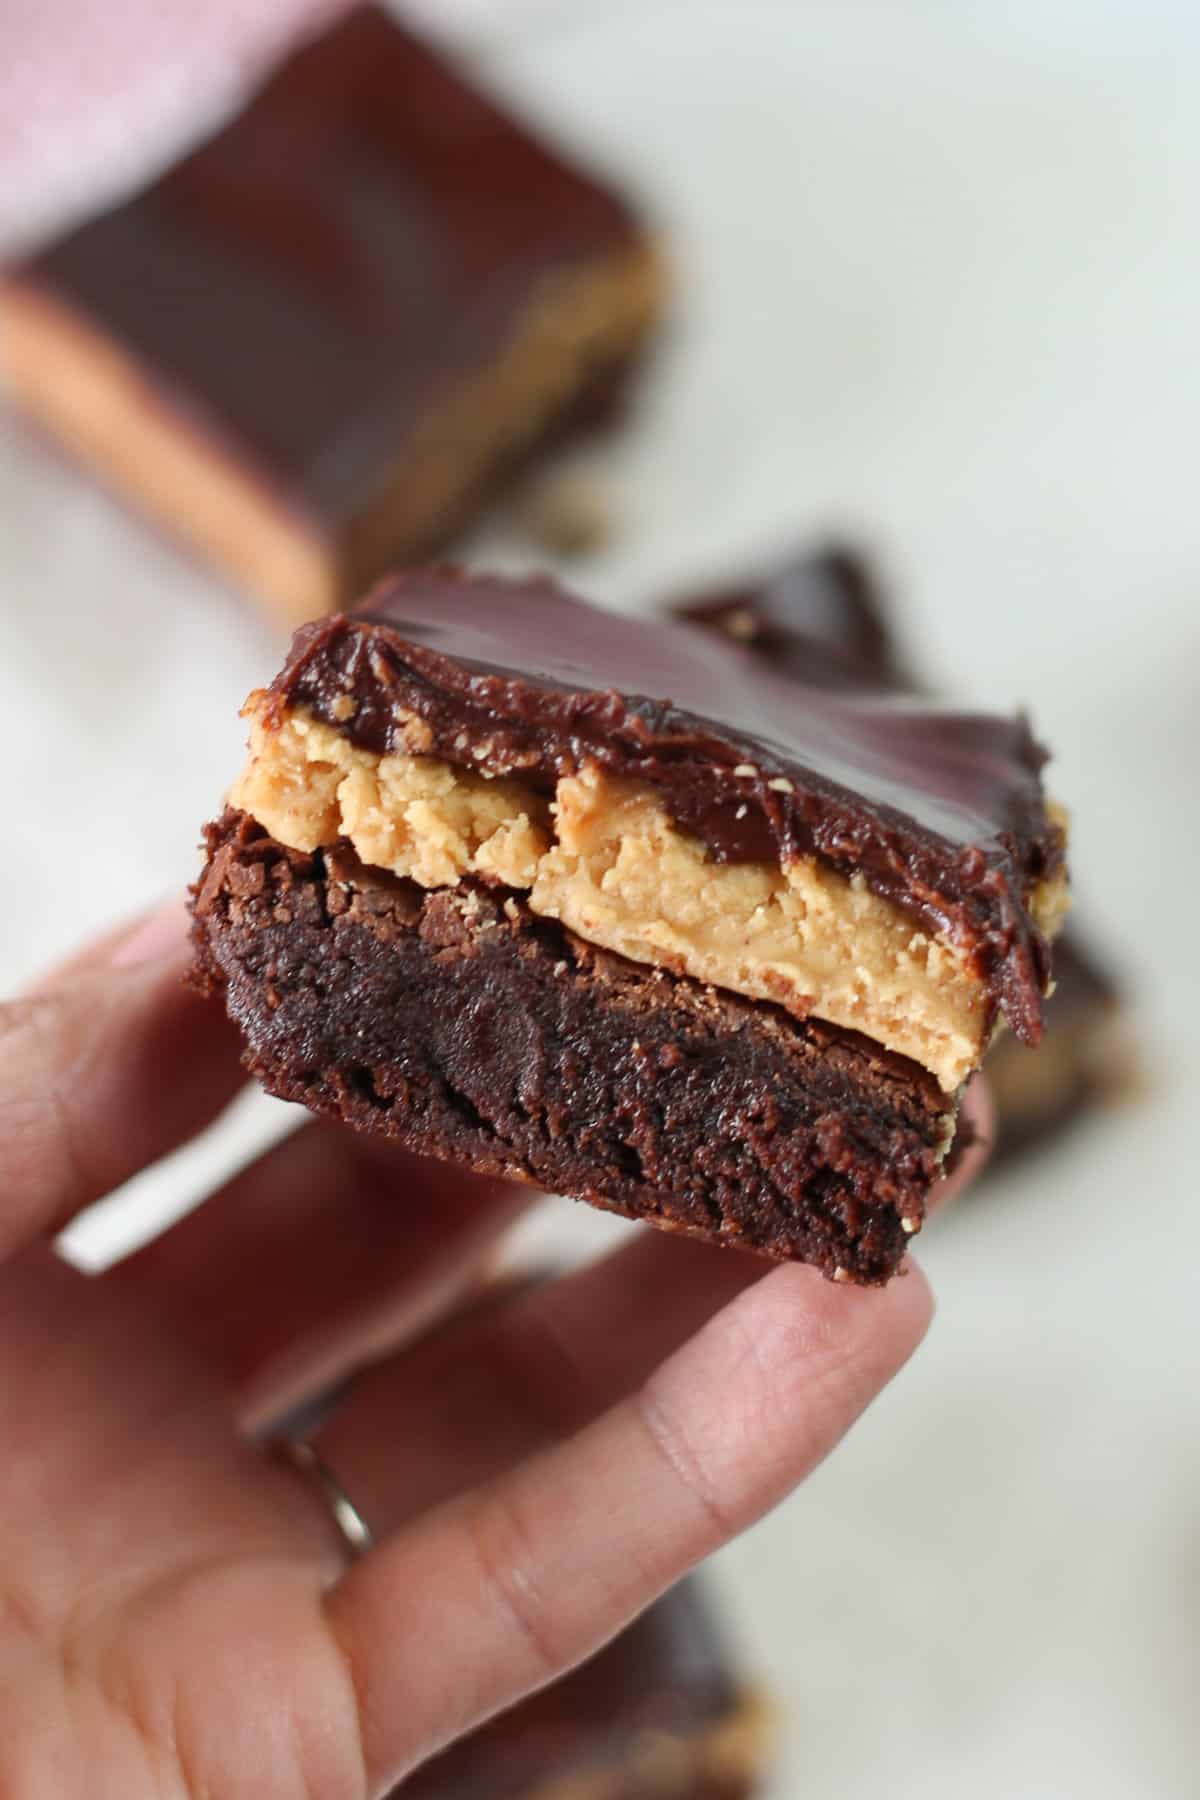 Hand holding a buckeye brownie showing all three layers: brownie, peanut butter, and chocolate ganache.